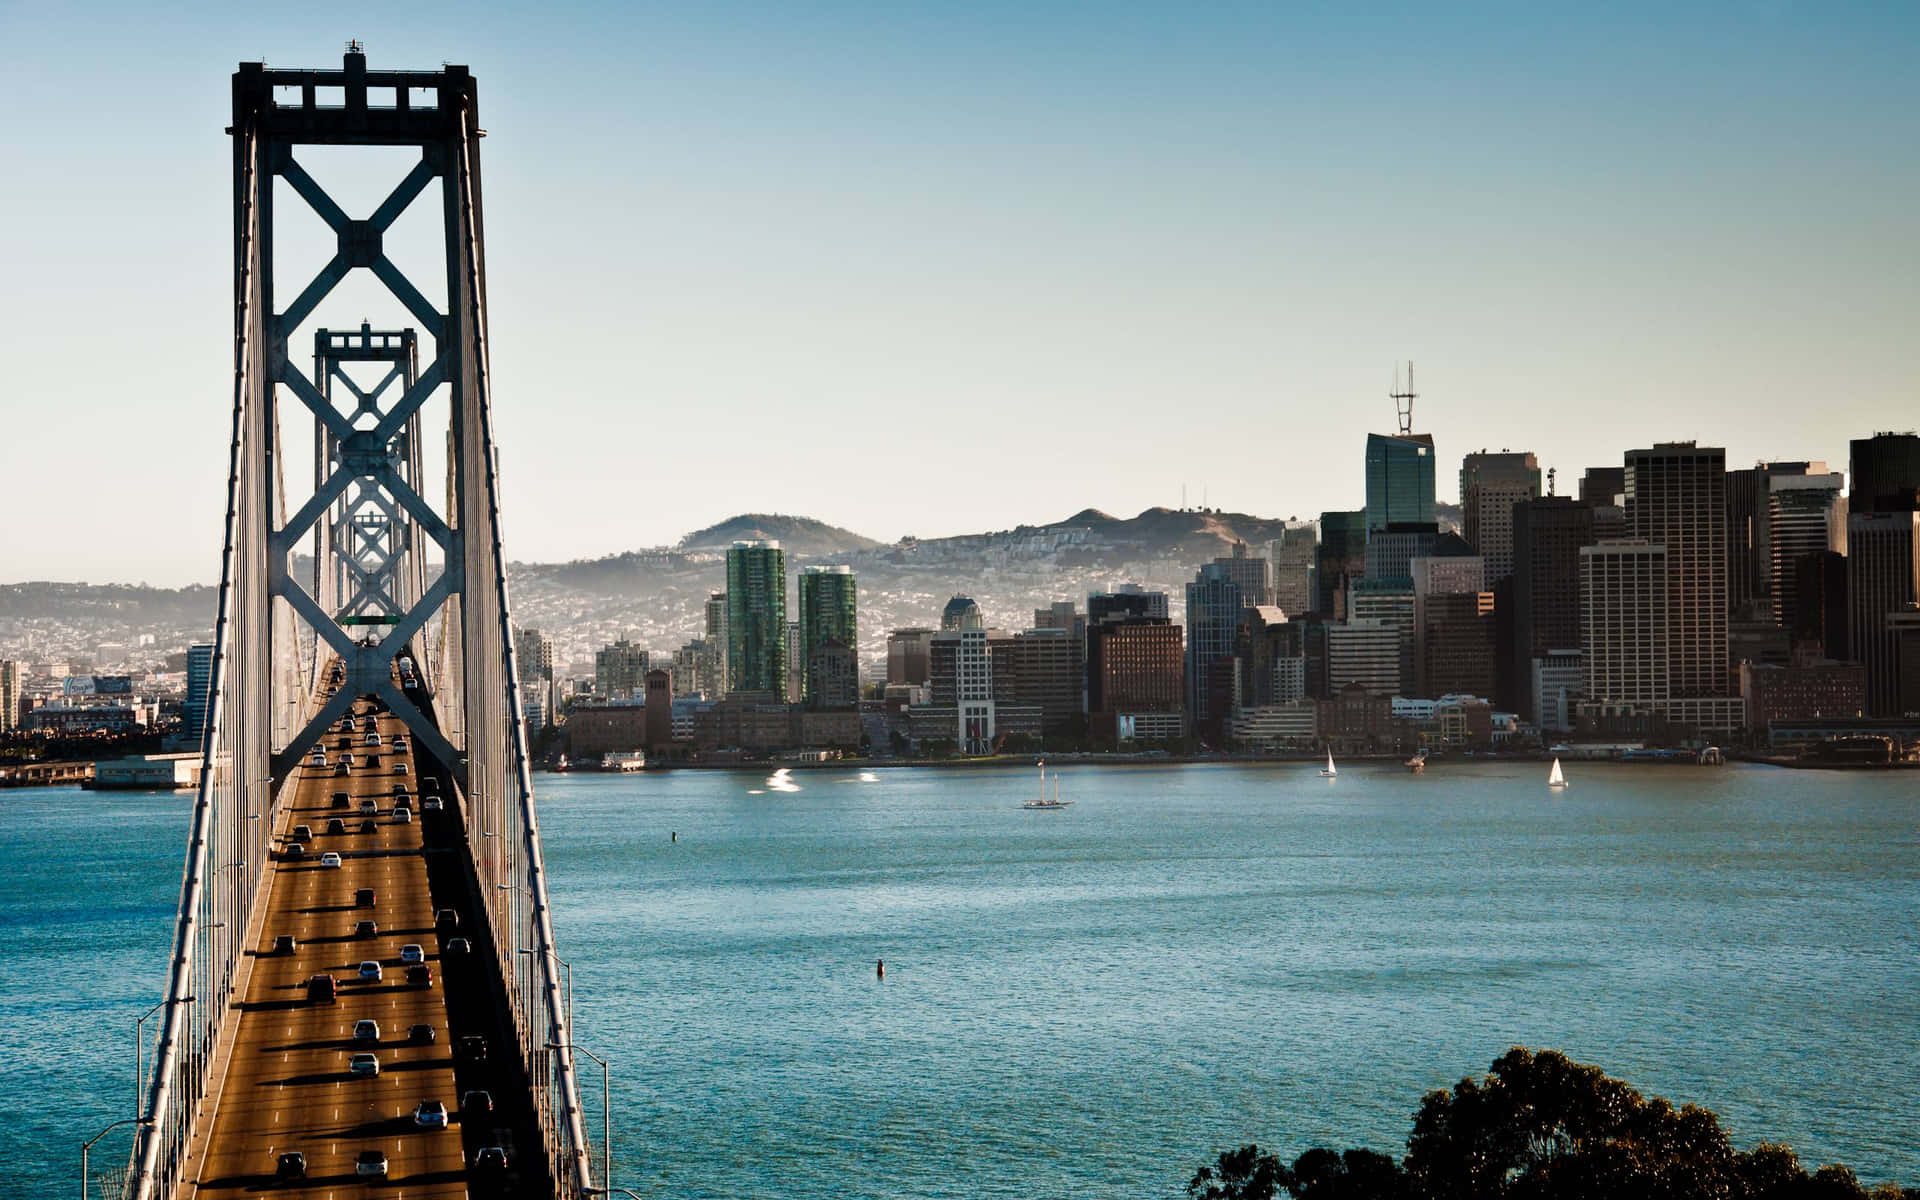 Working from a scenic spot overlooking San Francisco, California. Wallpaper